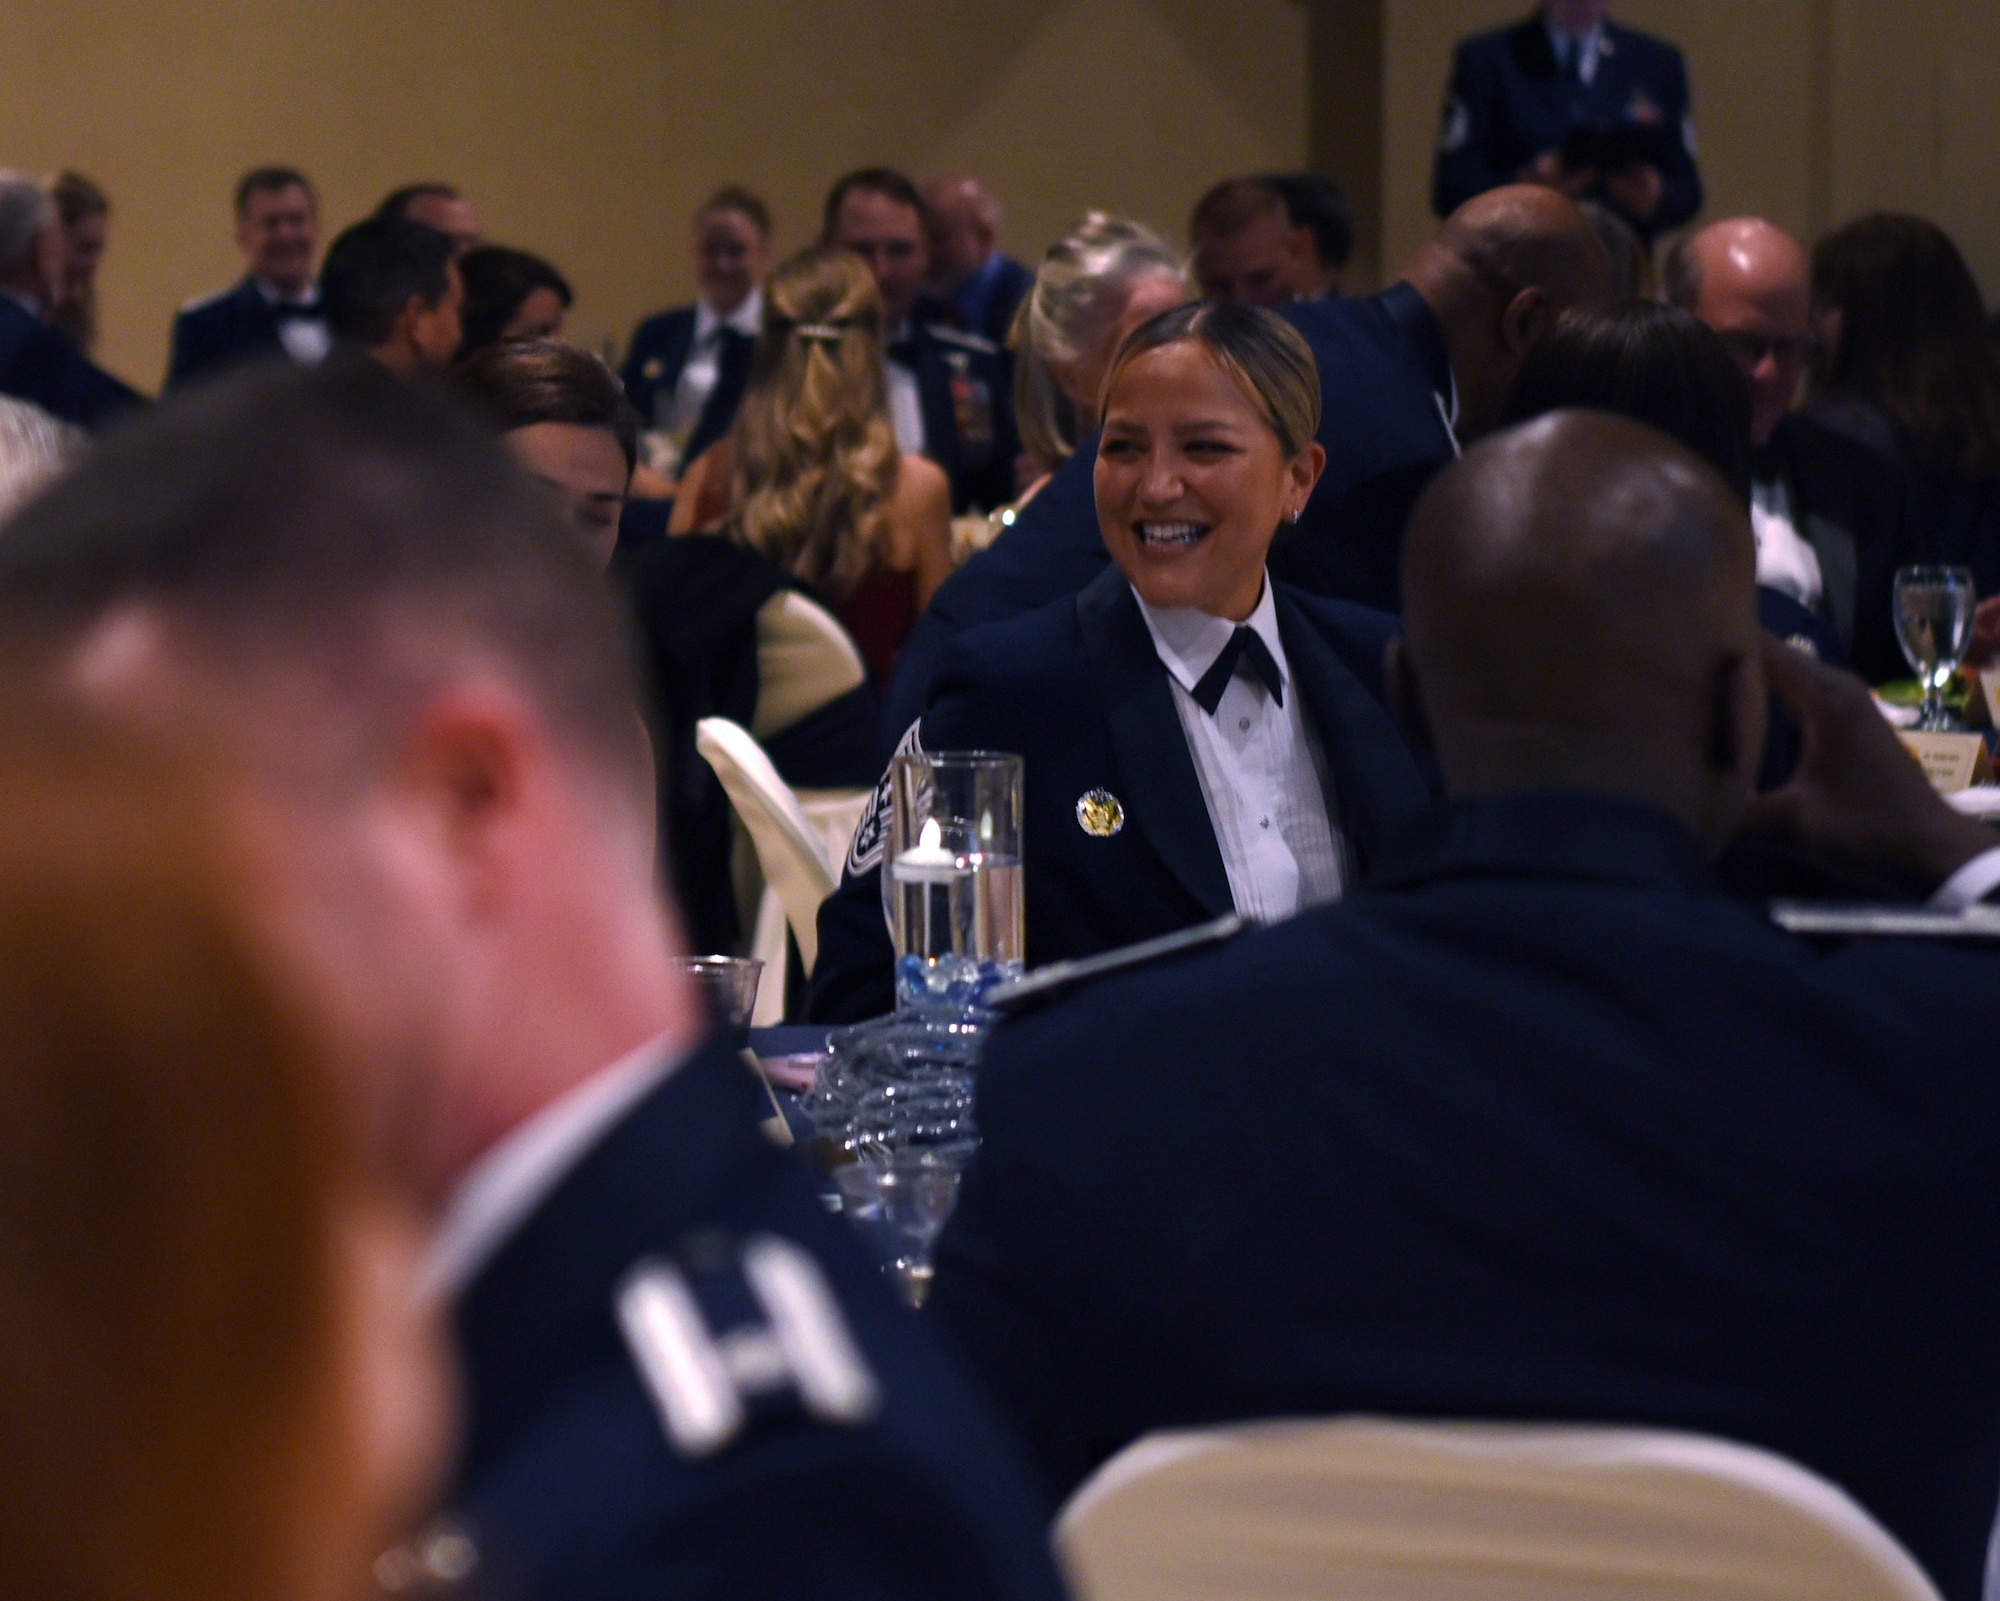 U.S. Air Force Chief Master Sgt. Rebecca Arbona, 17th Training Wing command chief, attends the 29th Annual Awards Ceremony at the McNease Convention Center, San Angelo, Texas, Feb. 26, 2022. Arbona assisted in recognizing the Annual Awards winners. (U.S. Air Force photo by Senior Airman Abbey Rieves)